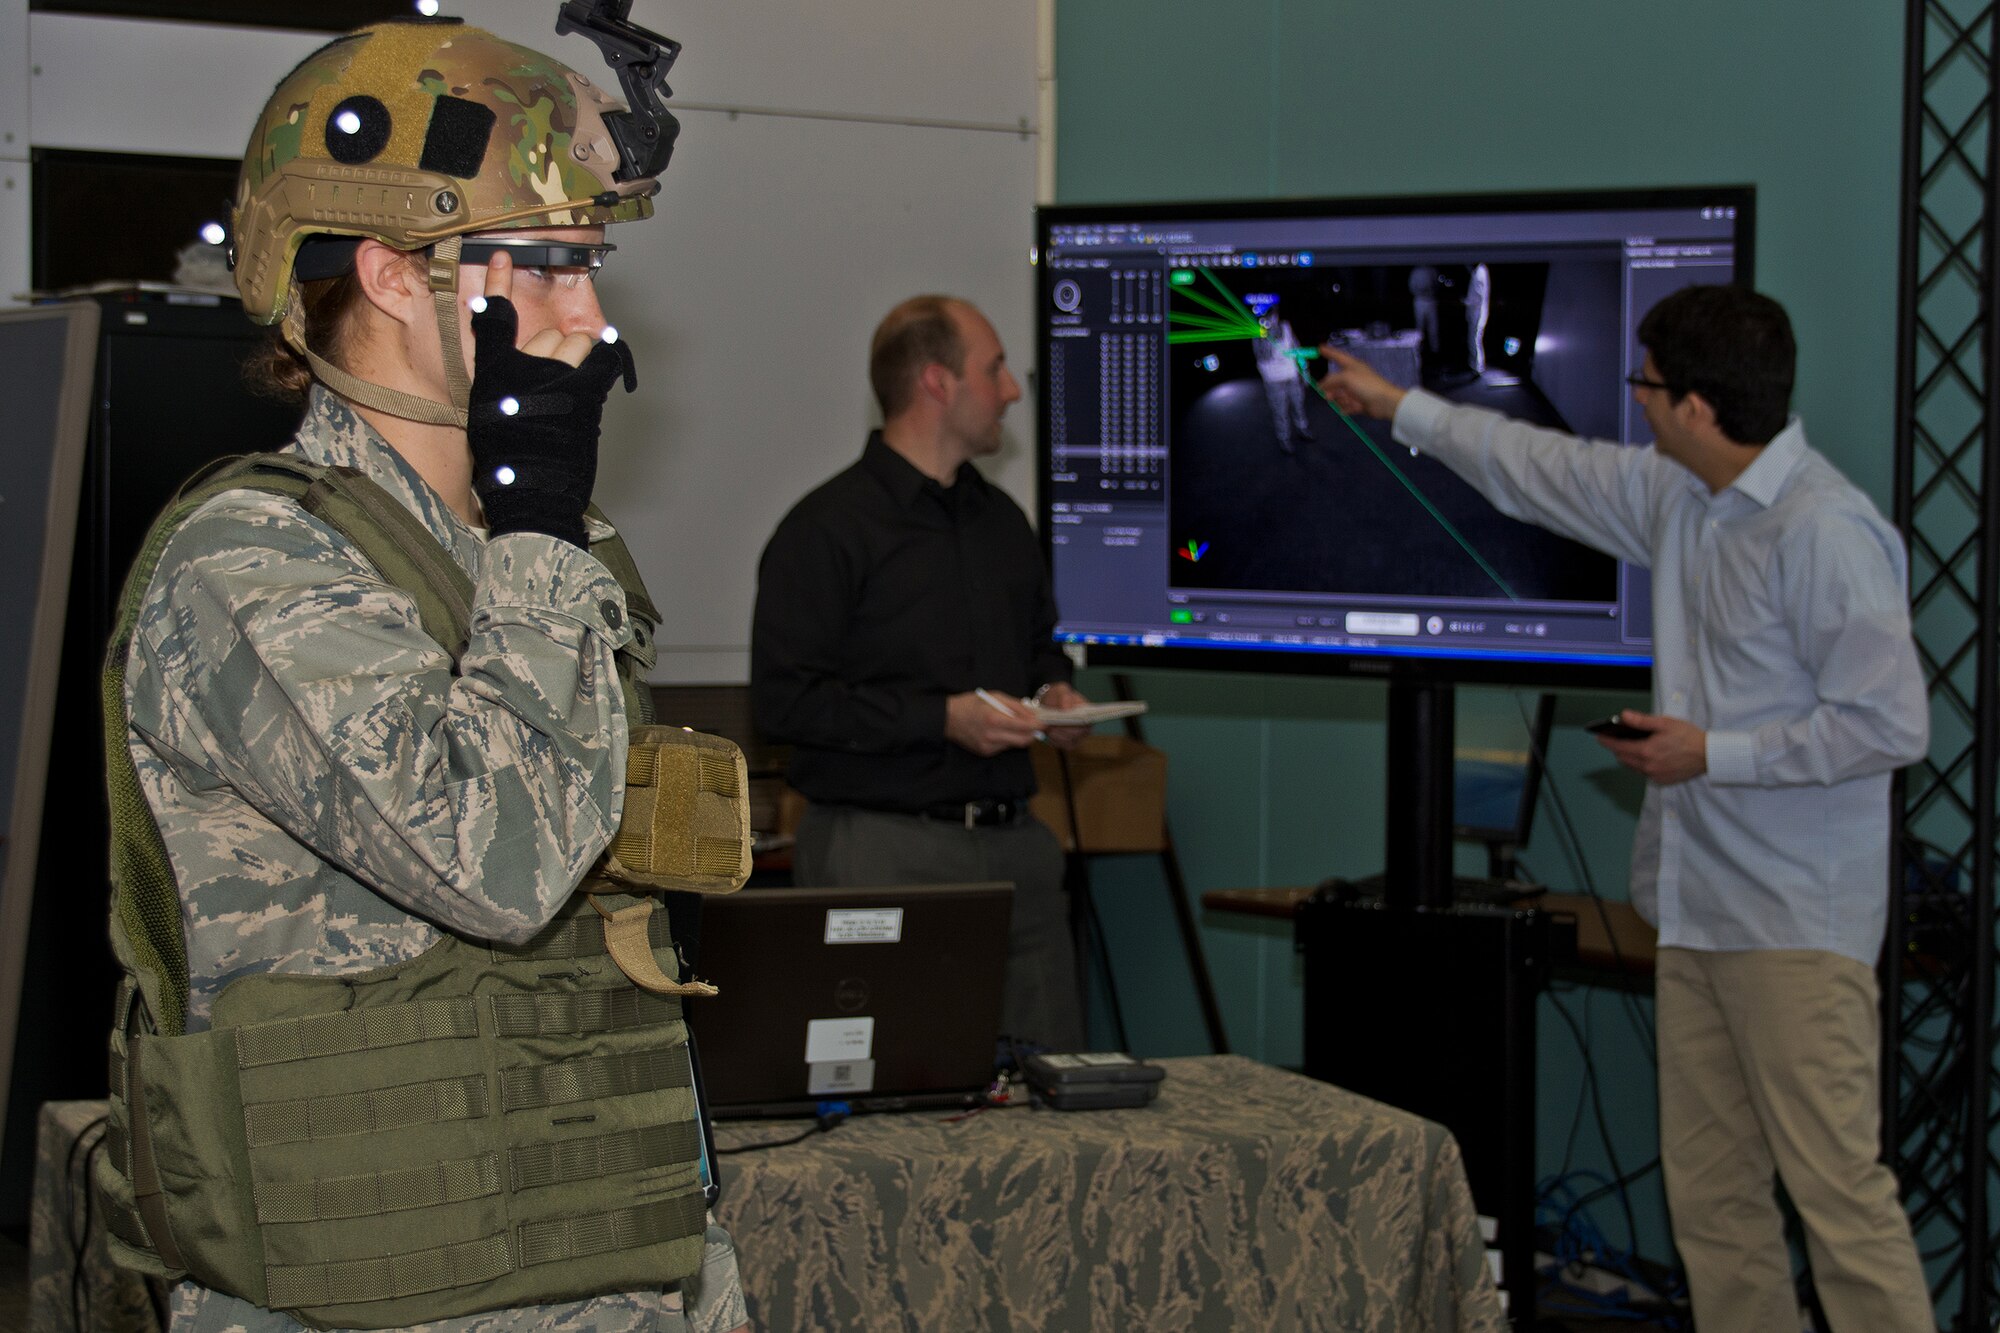 Left to right: 2Lt. Krystin Shanklin demonstrating the use of Google Glass
while Gregory Burnett, BATMAN Chief Engineer, and Andres Calvo, software
engineer and member of the BATMAN team, 711 Human Performance Wing, Air
Force Lab, review the computer screen. (Photo by Richard Eldridge, 711 HPW)
